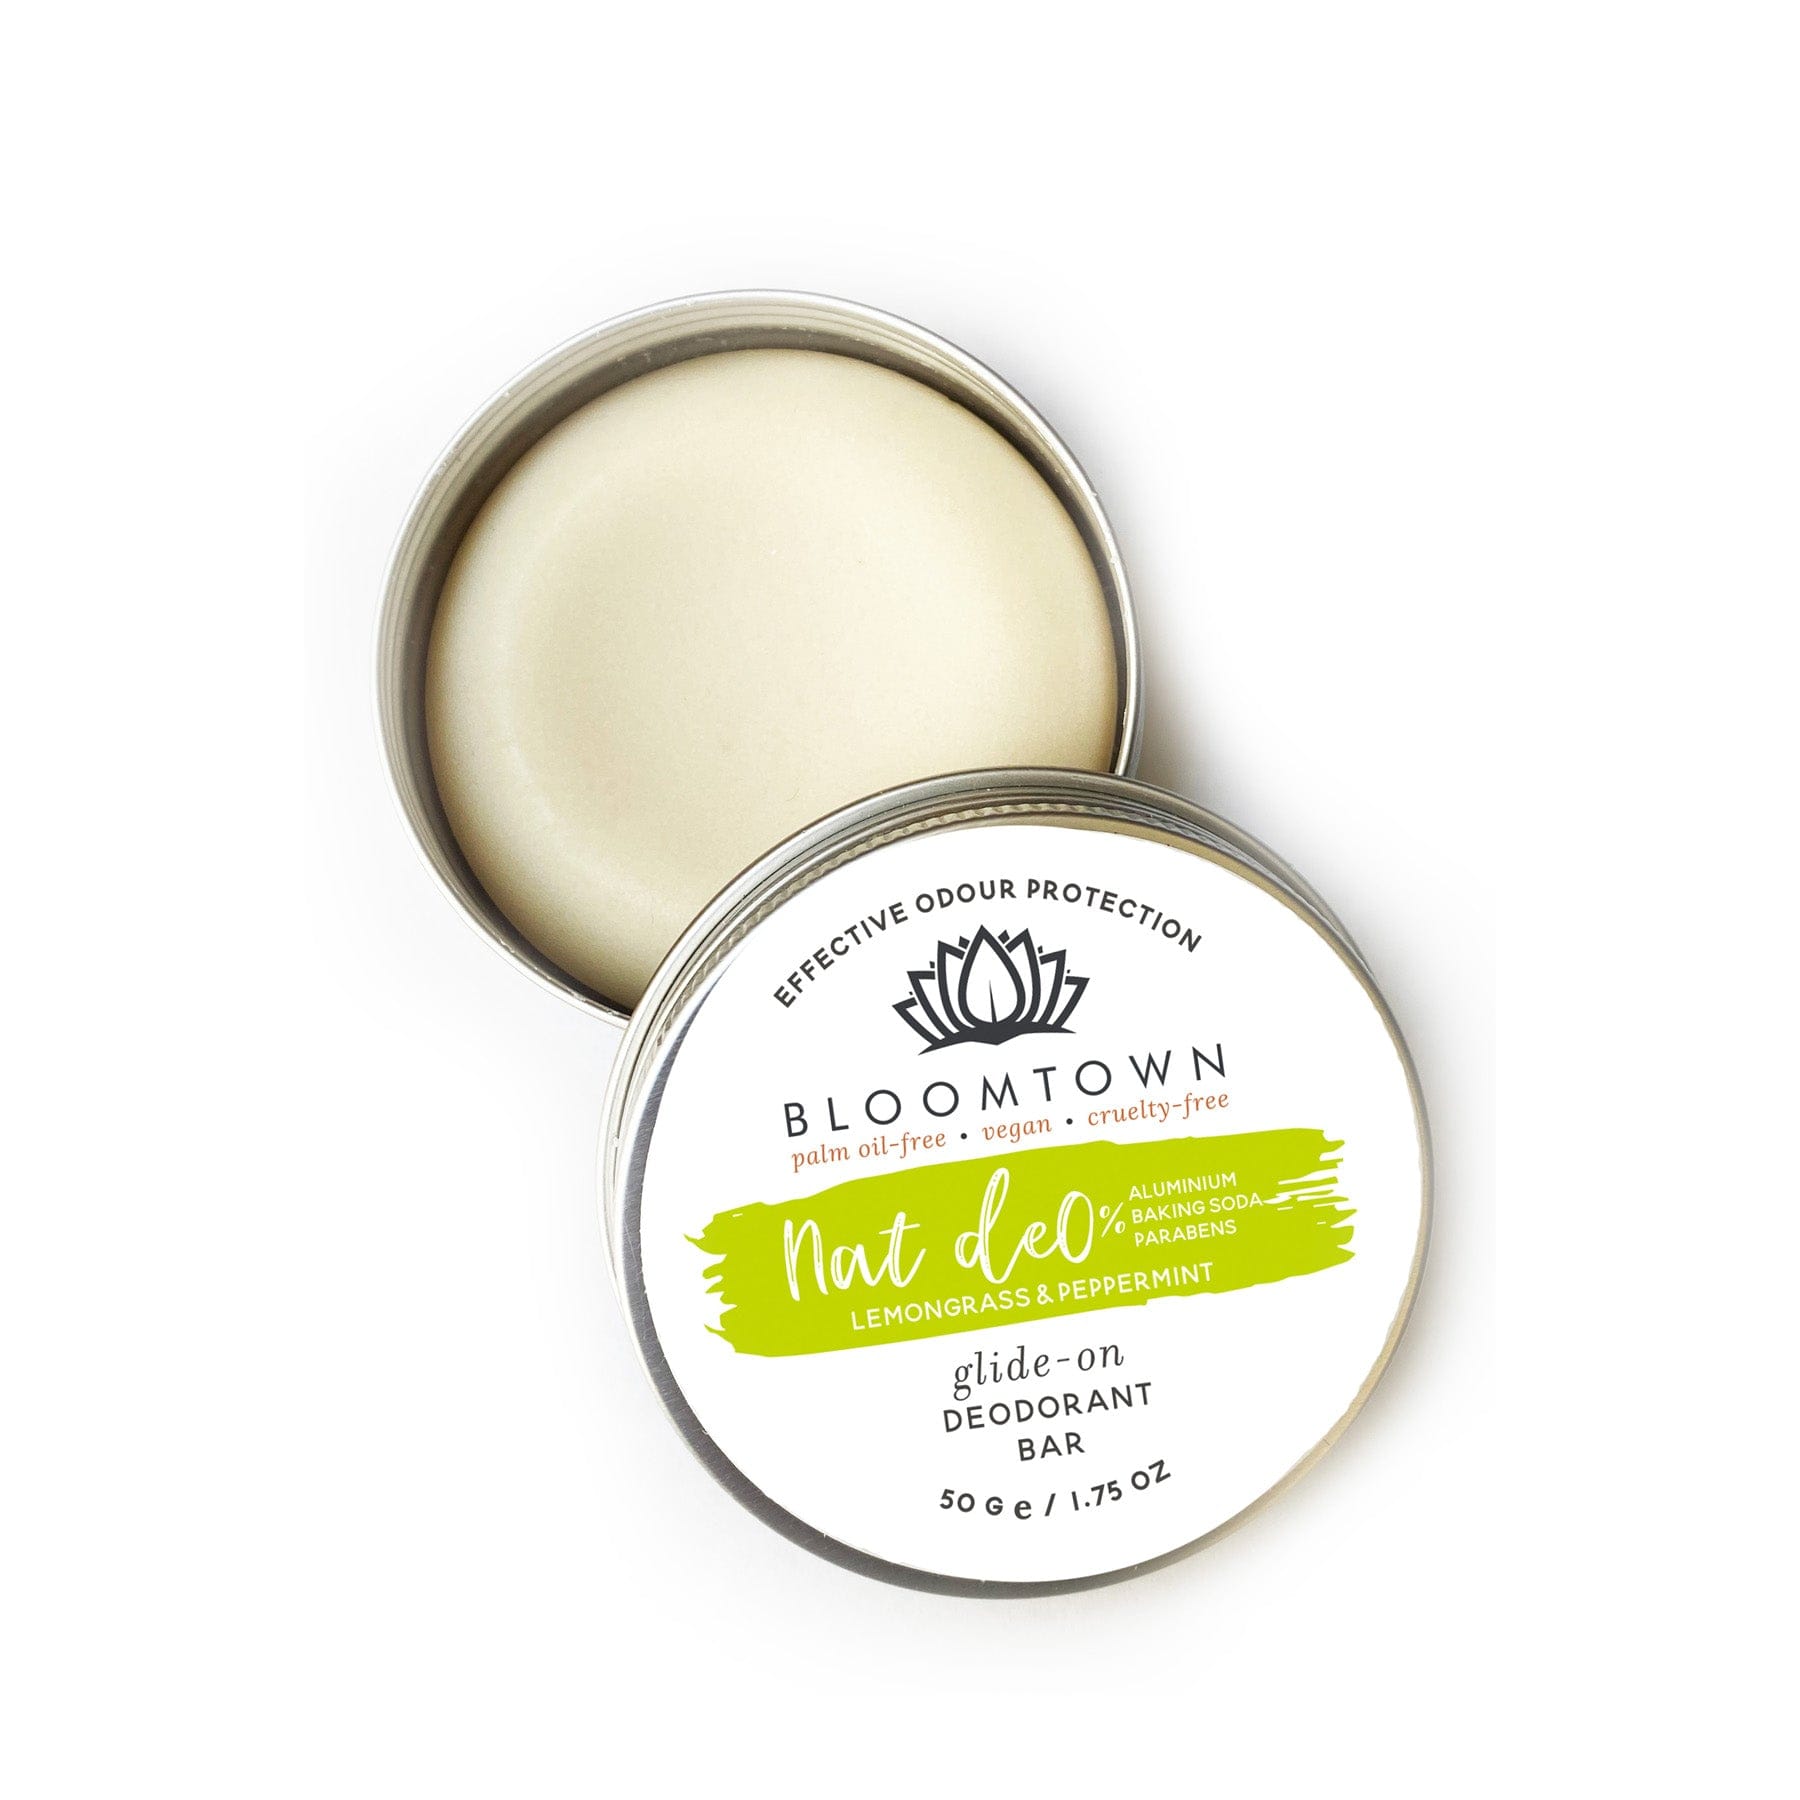 Bloomtown natural deodorant in open tin, vegan and cruelty-free, lemongrass and peppermint scent, palm-oil free, aluminum-free, baking soda-free, plastic-free packaging